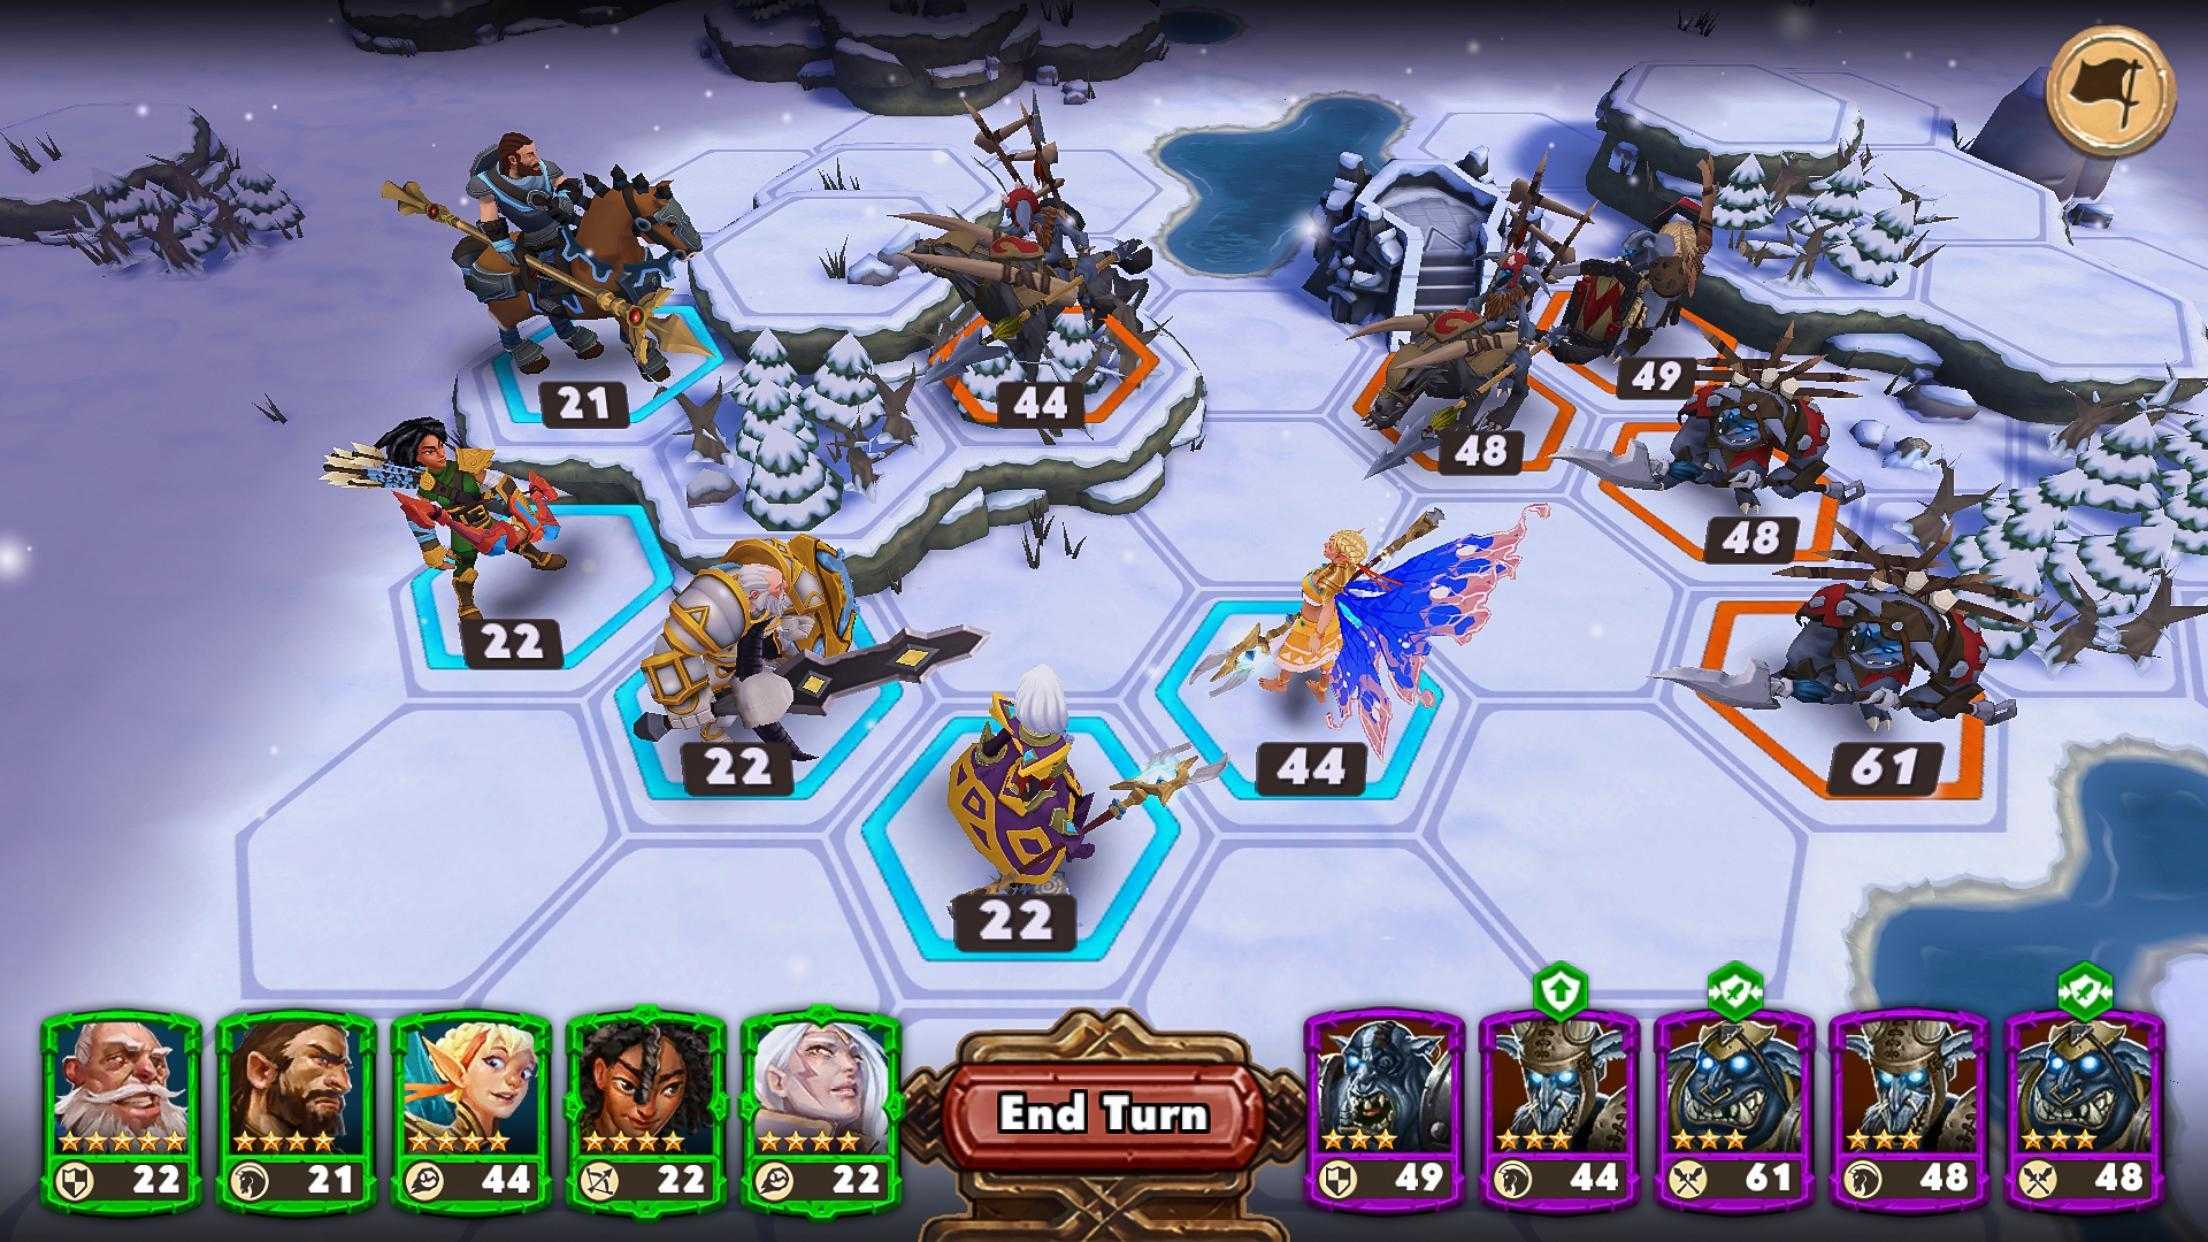 Warlords of Aternum v1.22.0 (Mod) Apk